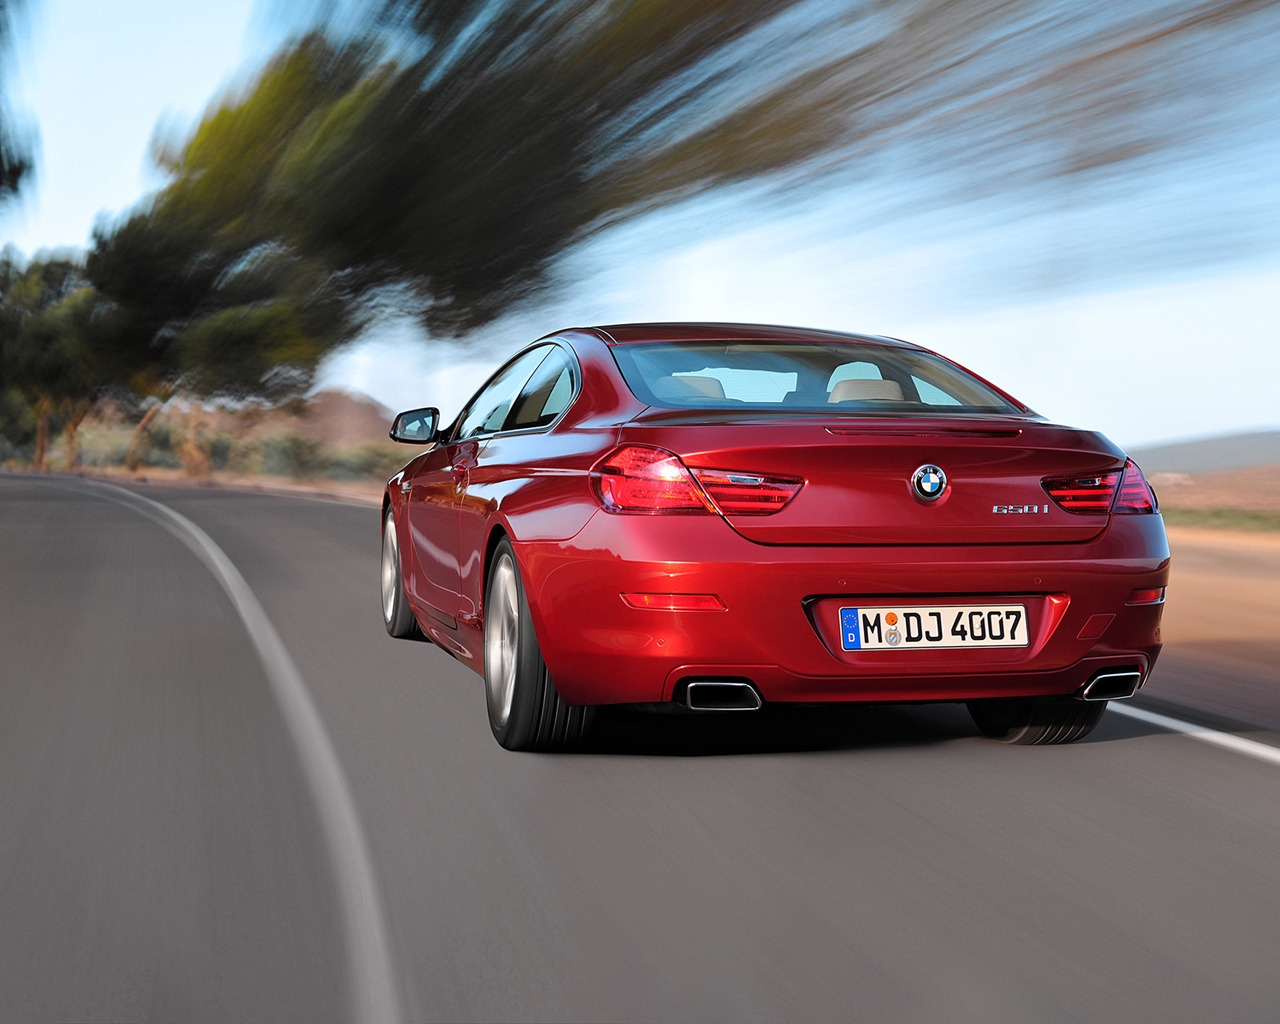 BMW 650i Coupe Rear for 1280 x 1024 resolution